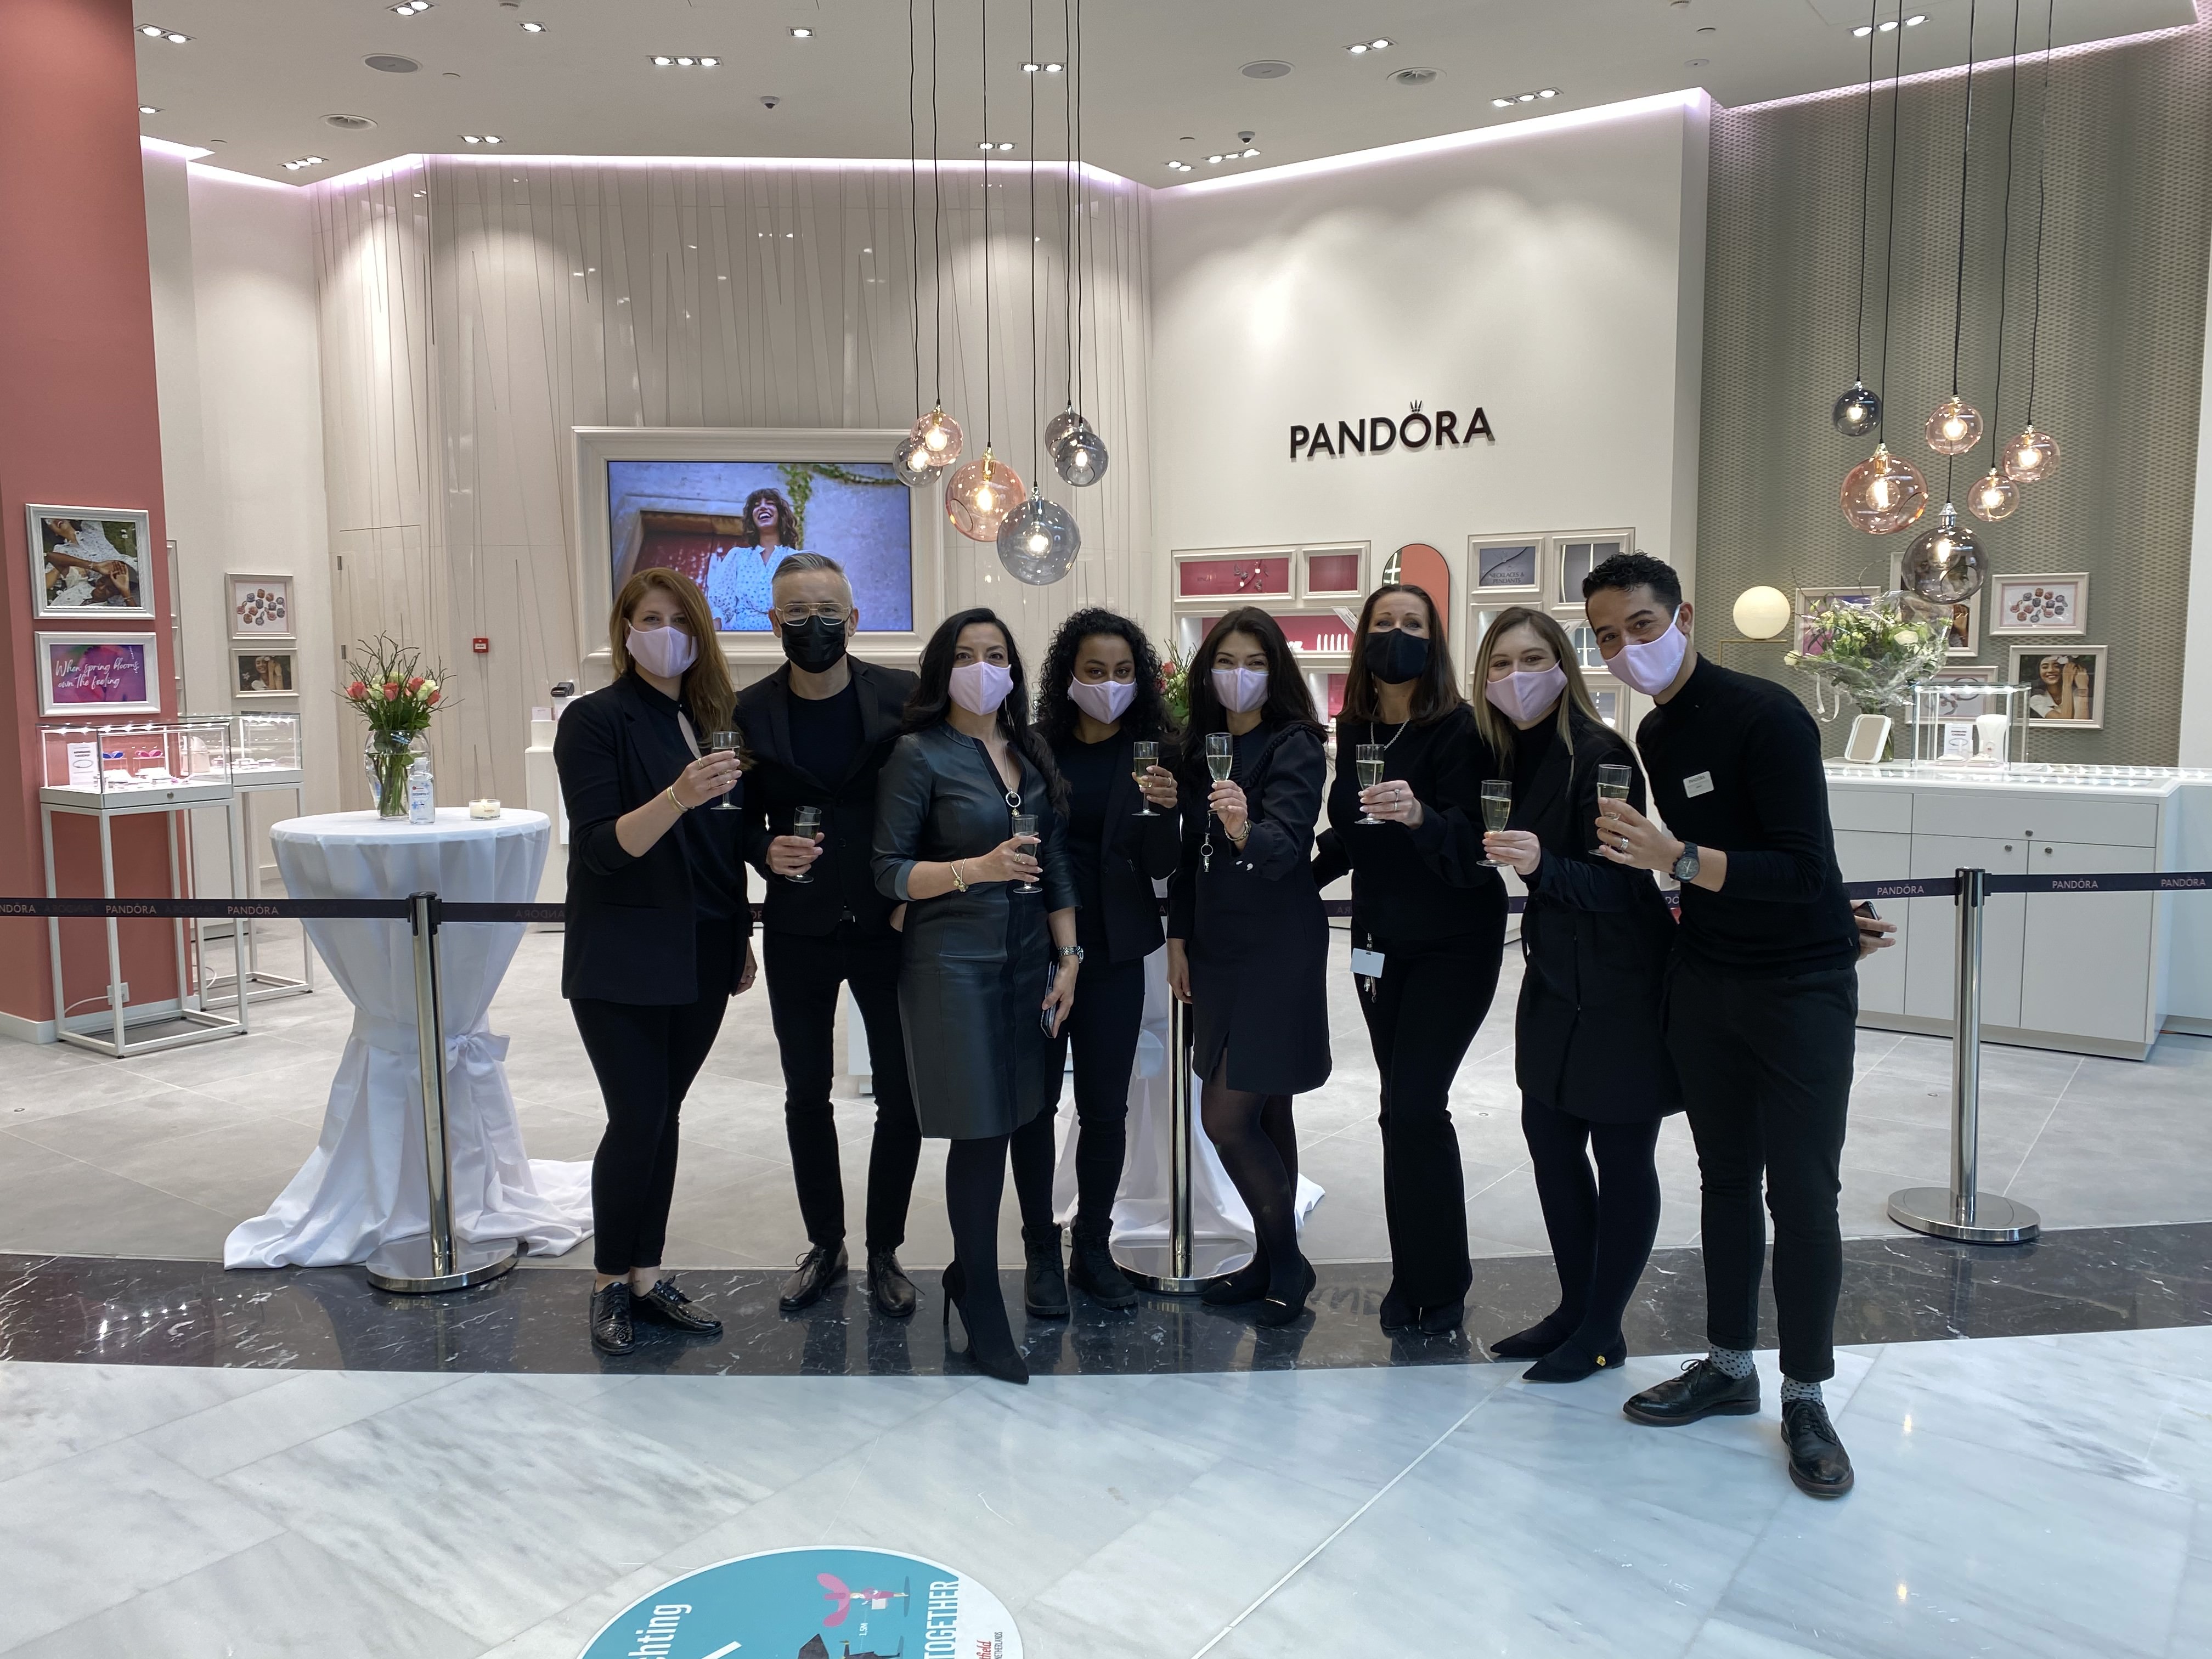 Tog Overfladisk ufravigelige Pandora Group on Twitter: "Congratulations to our team in The Netherlands  on the opening of our 26th store in the country - this time located in the  prestigious Westfield Mall. The gorgeous